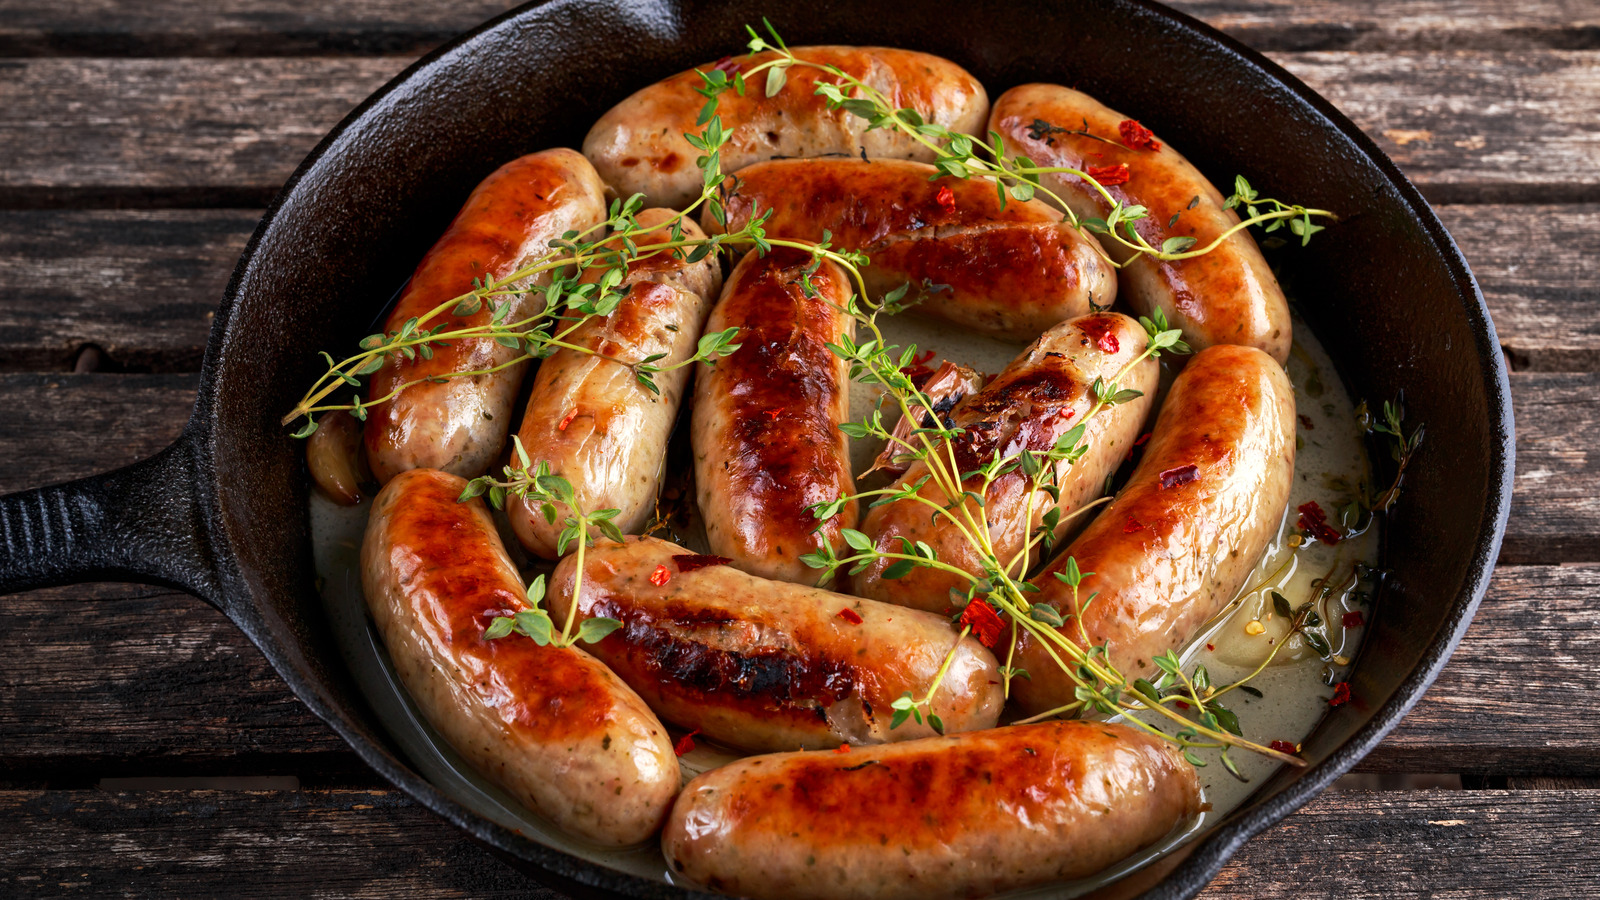 Perfectly Preparing Brats: Boiling on the Stove Before Grilling缩略图